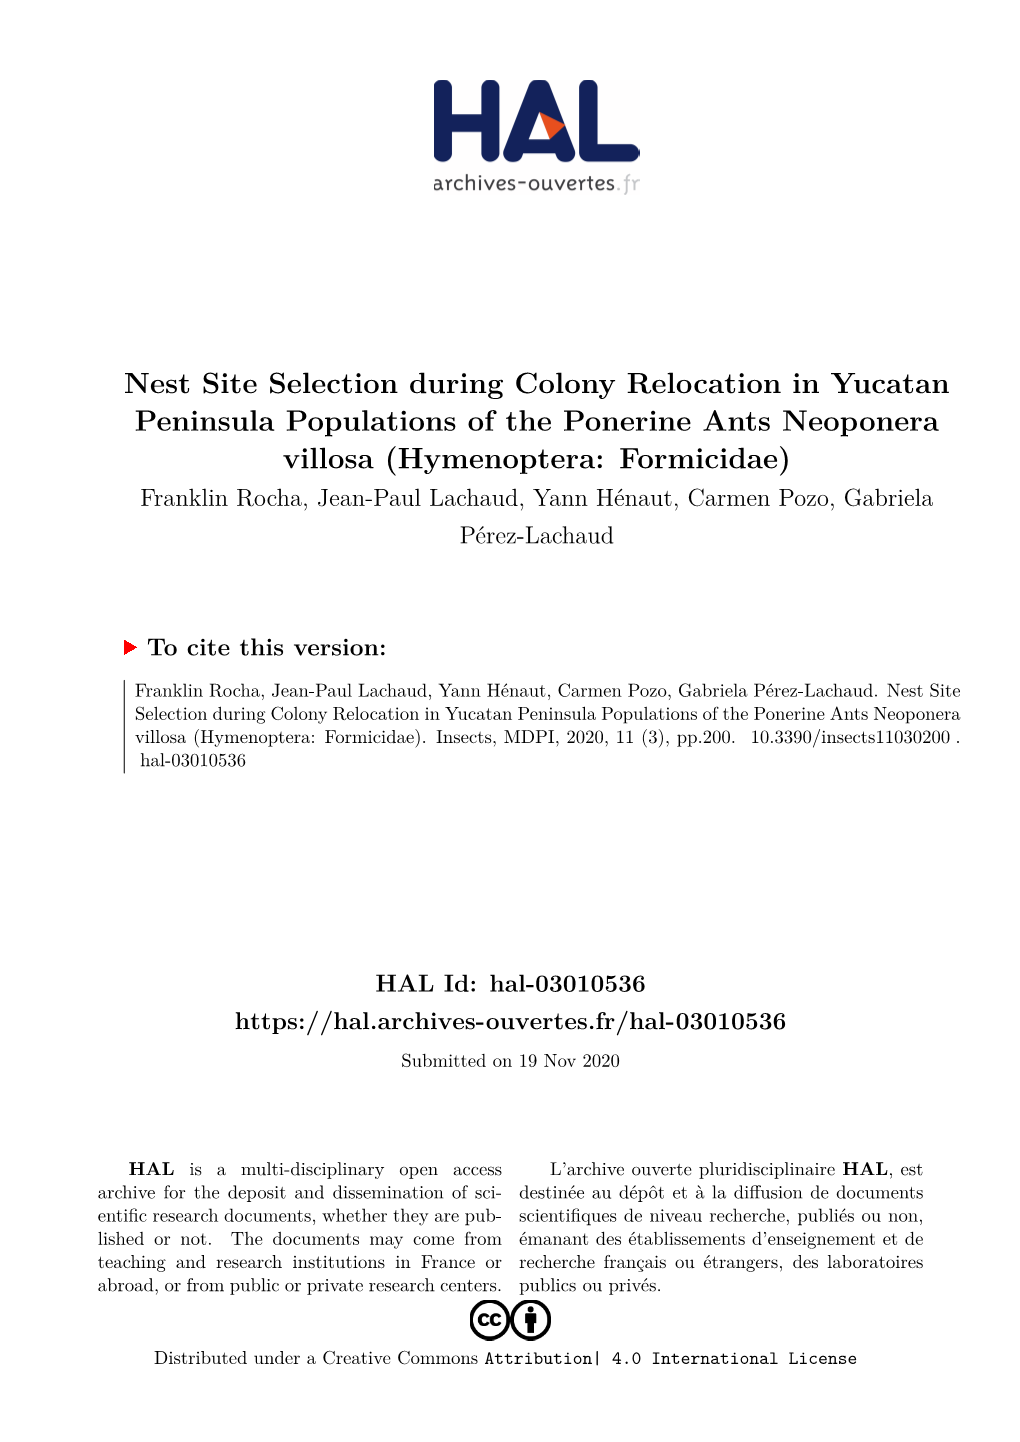 Nest Site Selection During Colony Relocation In